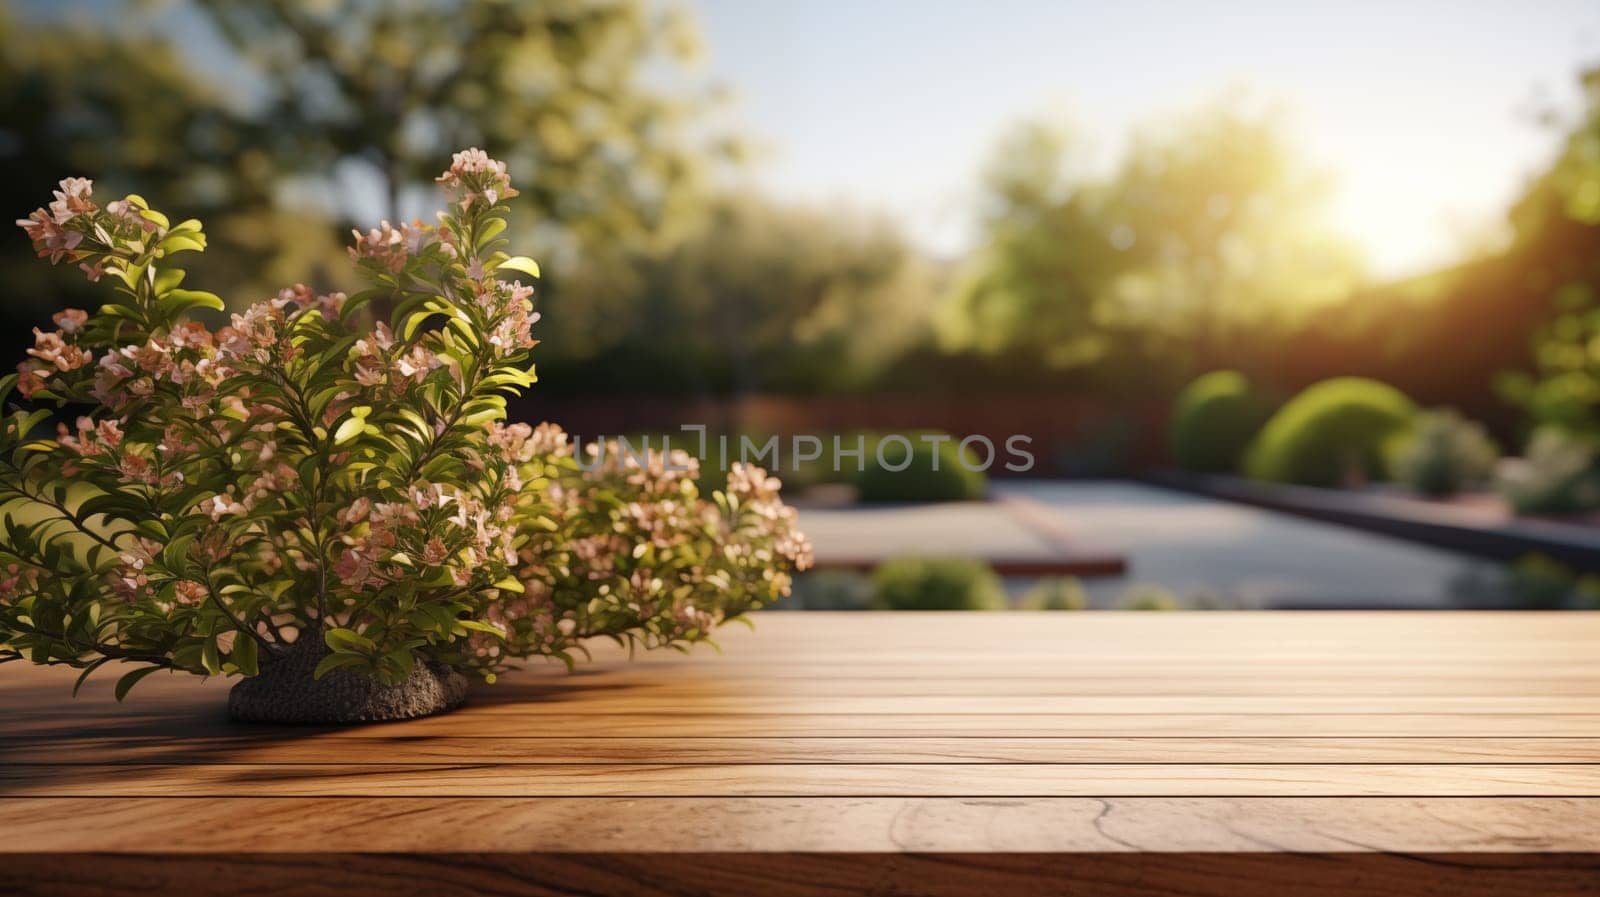 garden scene with warm sunlit foliage and flowering plant on wooden table. by Zakharova